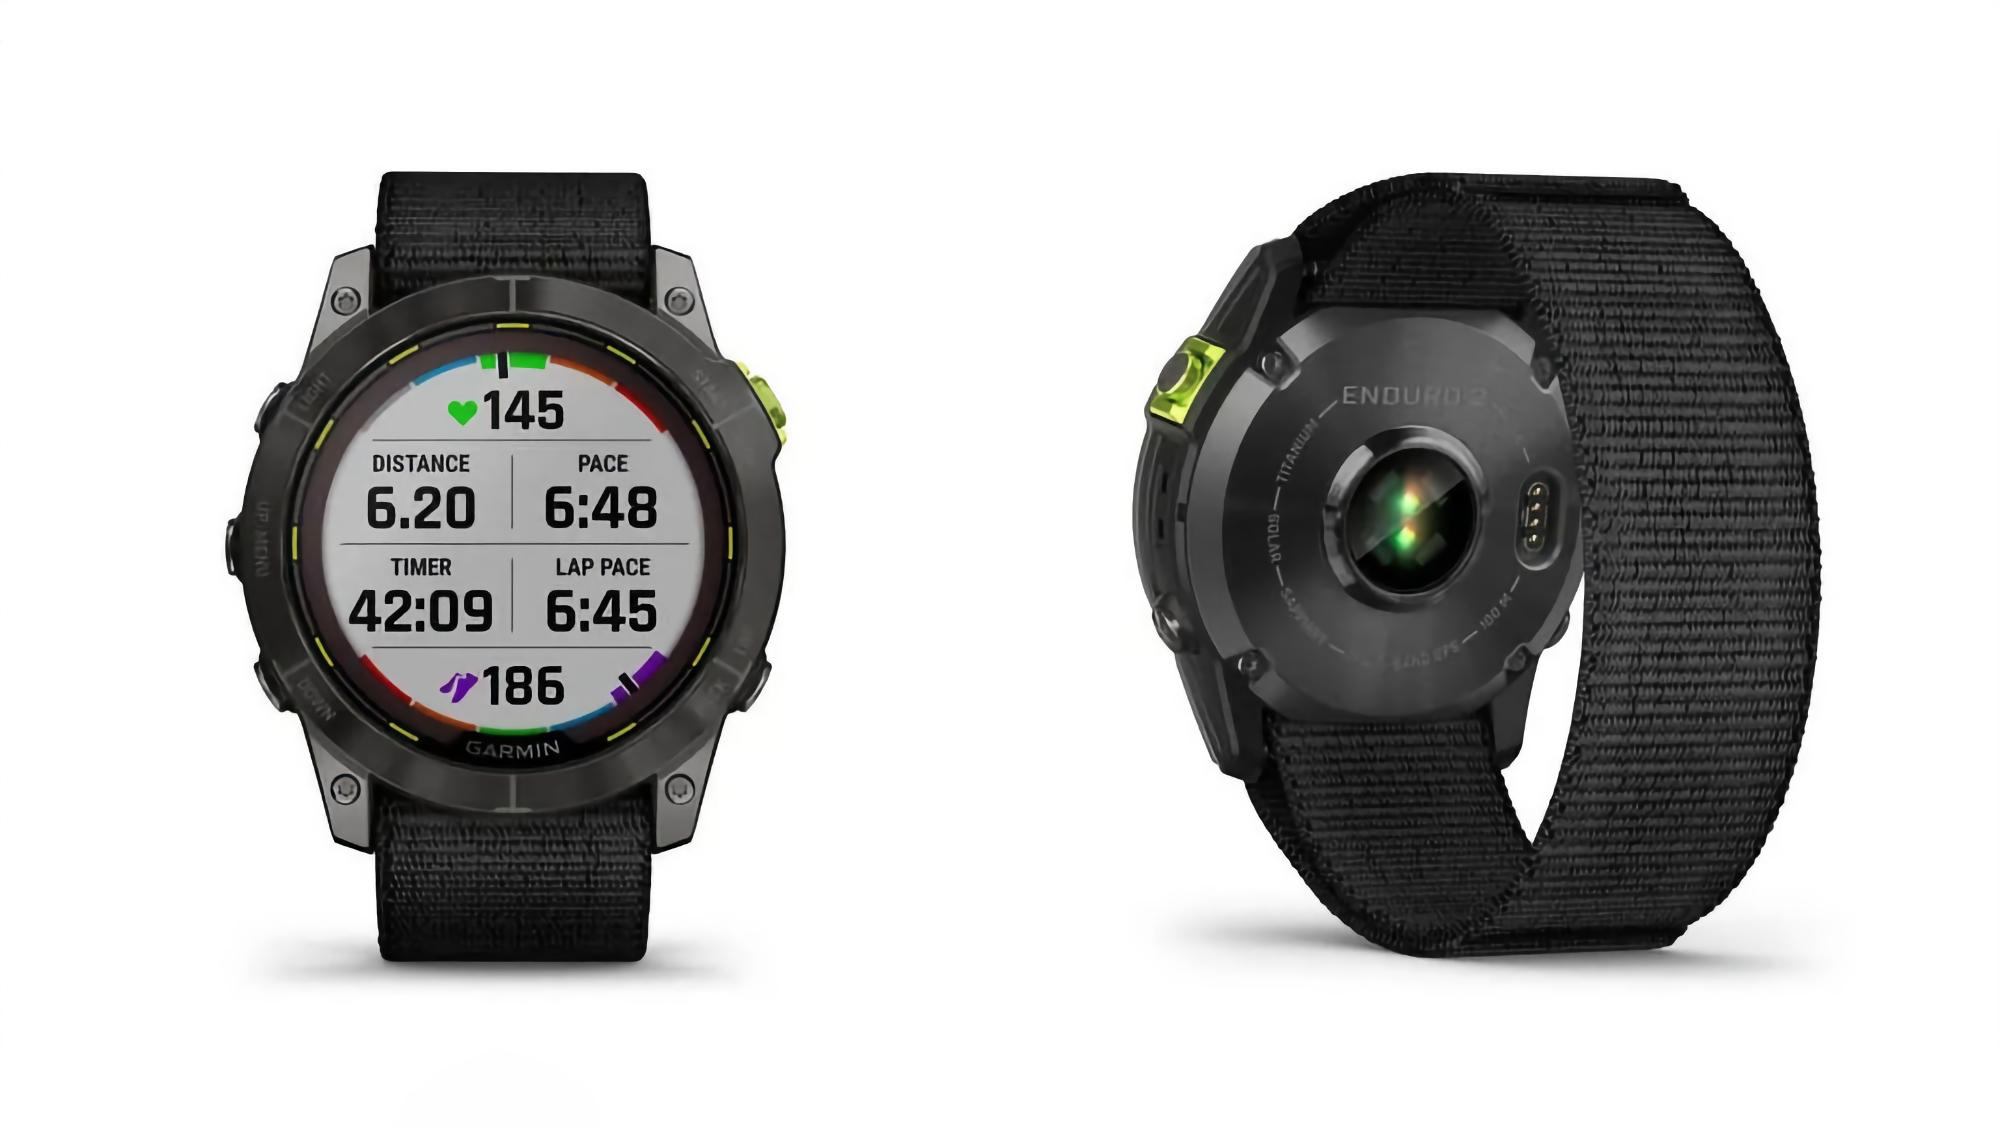 Garmin Enduro 2: multi-sport smartwatch with GPS, solar charging, titanium case and battery life up to 46 days